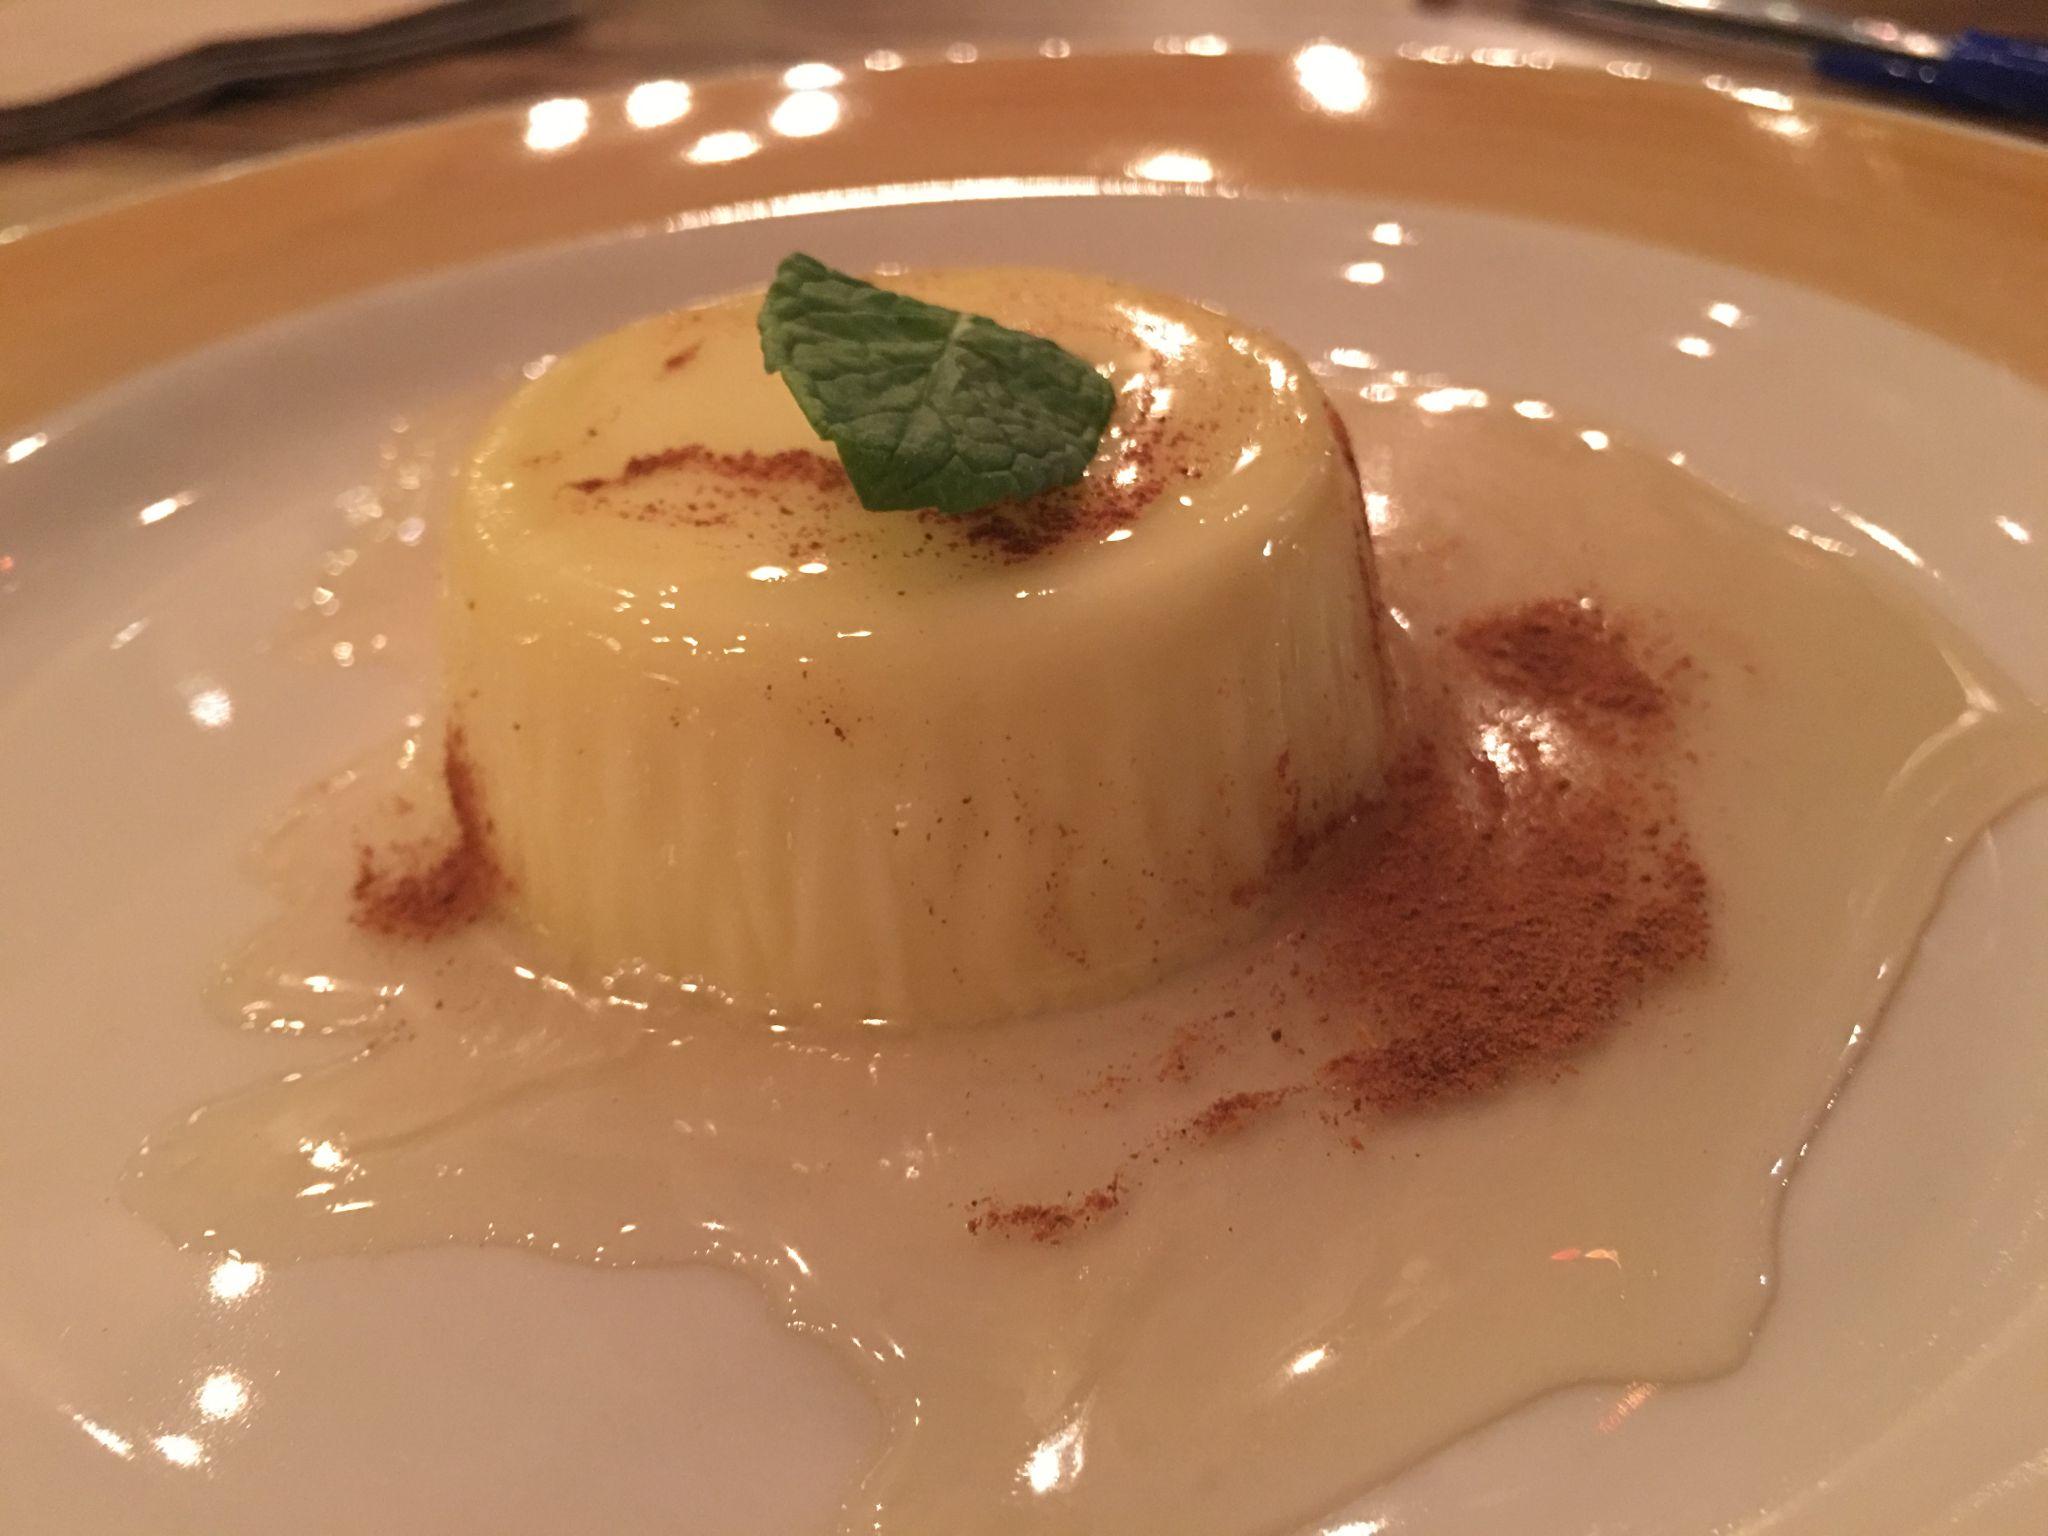 Flan drenched with Mezcal tequila-infused honey and adorned with cinnamon and mint. Photo by Rachael Worthington. 